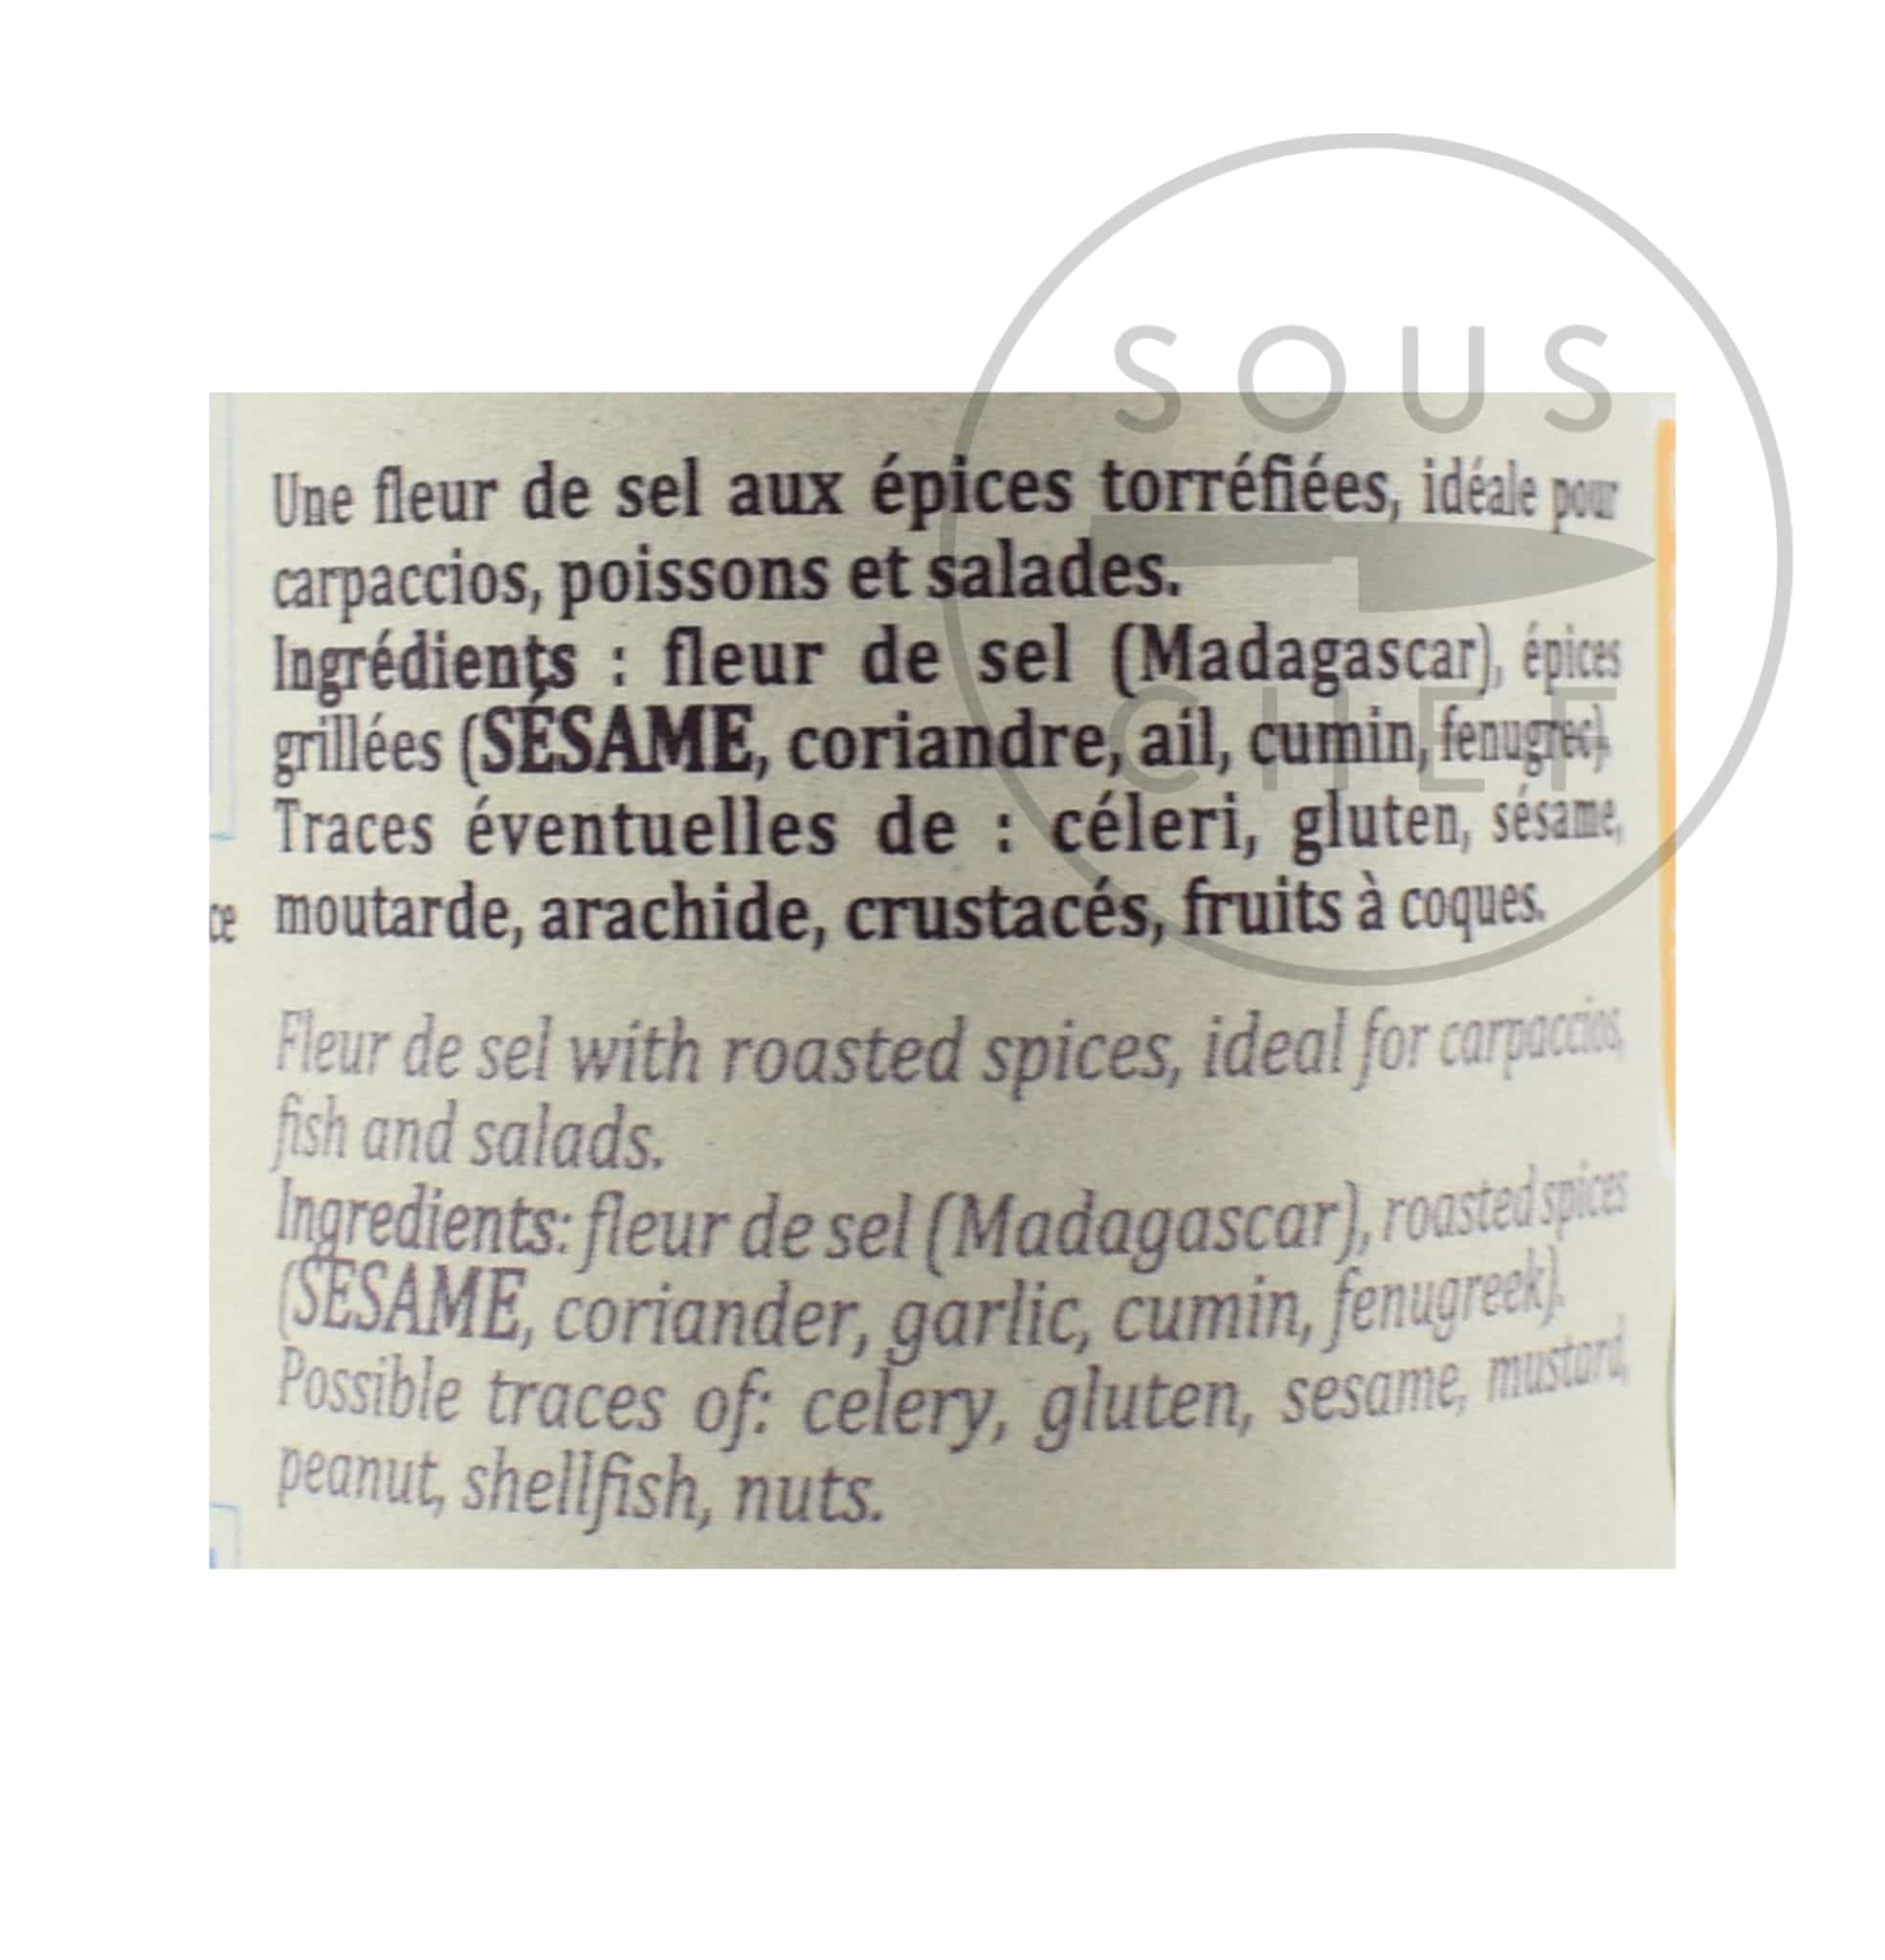 Terre Exotique Fleur De Sel With Roasted Spices 90g